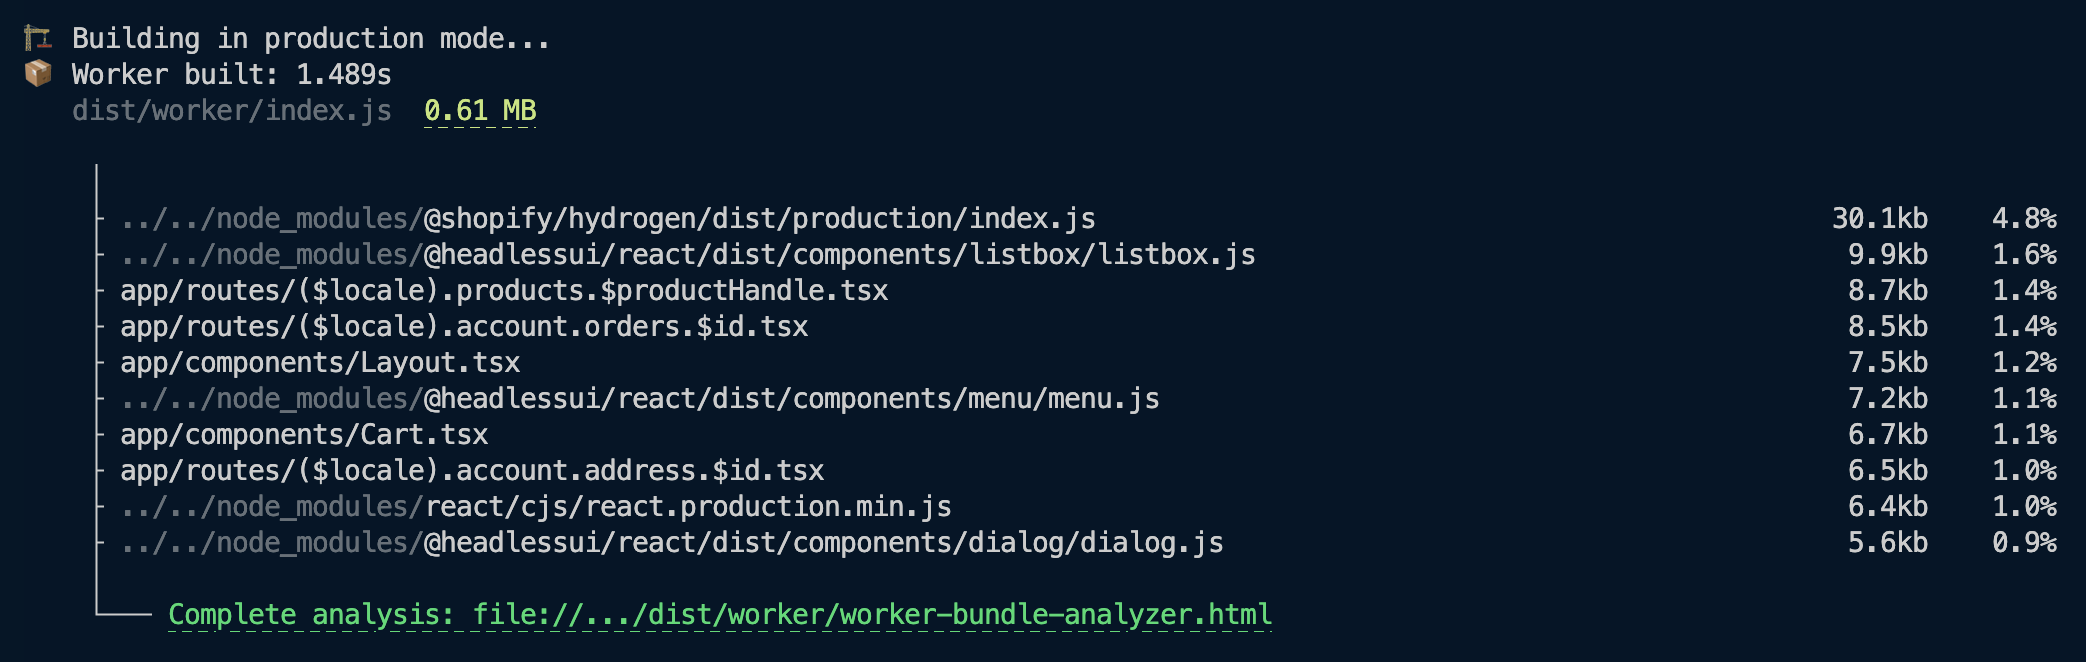 Summary of the dependencies that contribute to the bundle size.